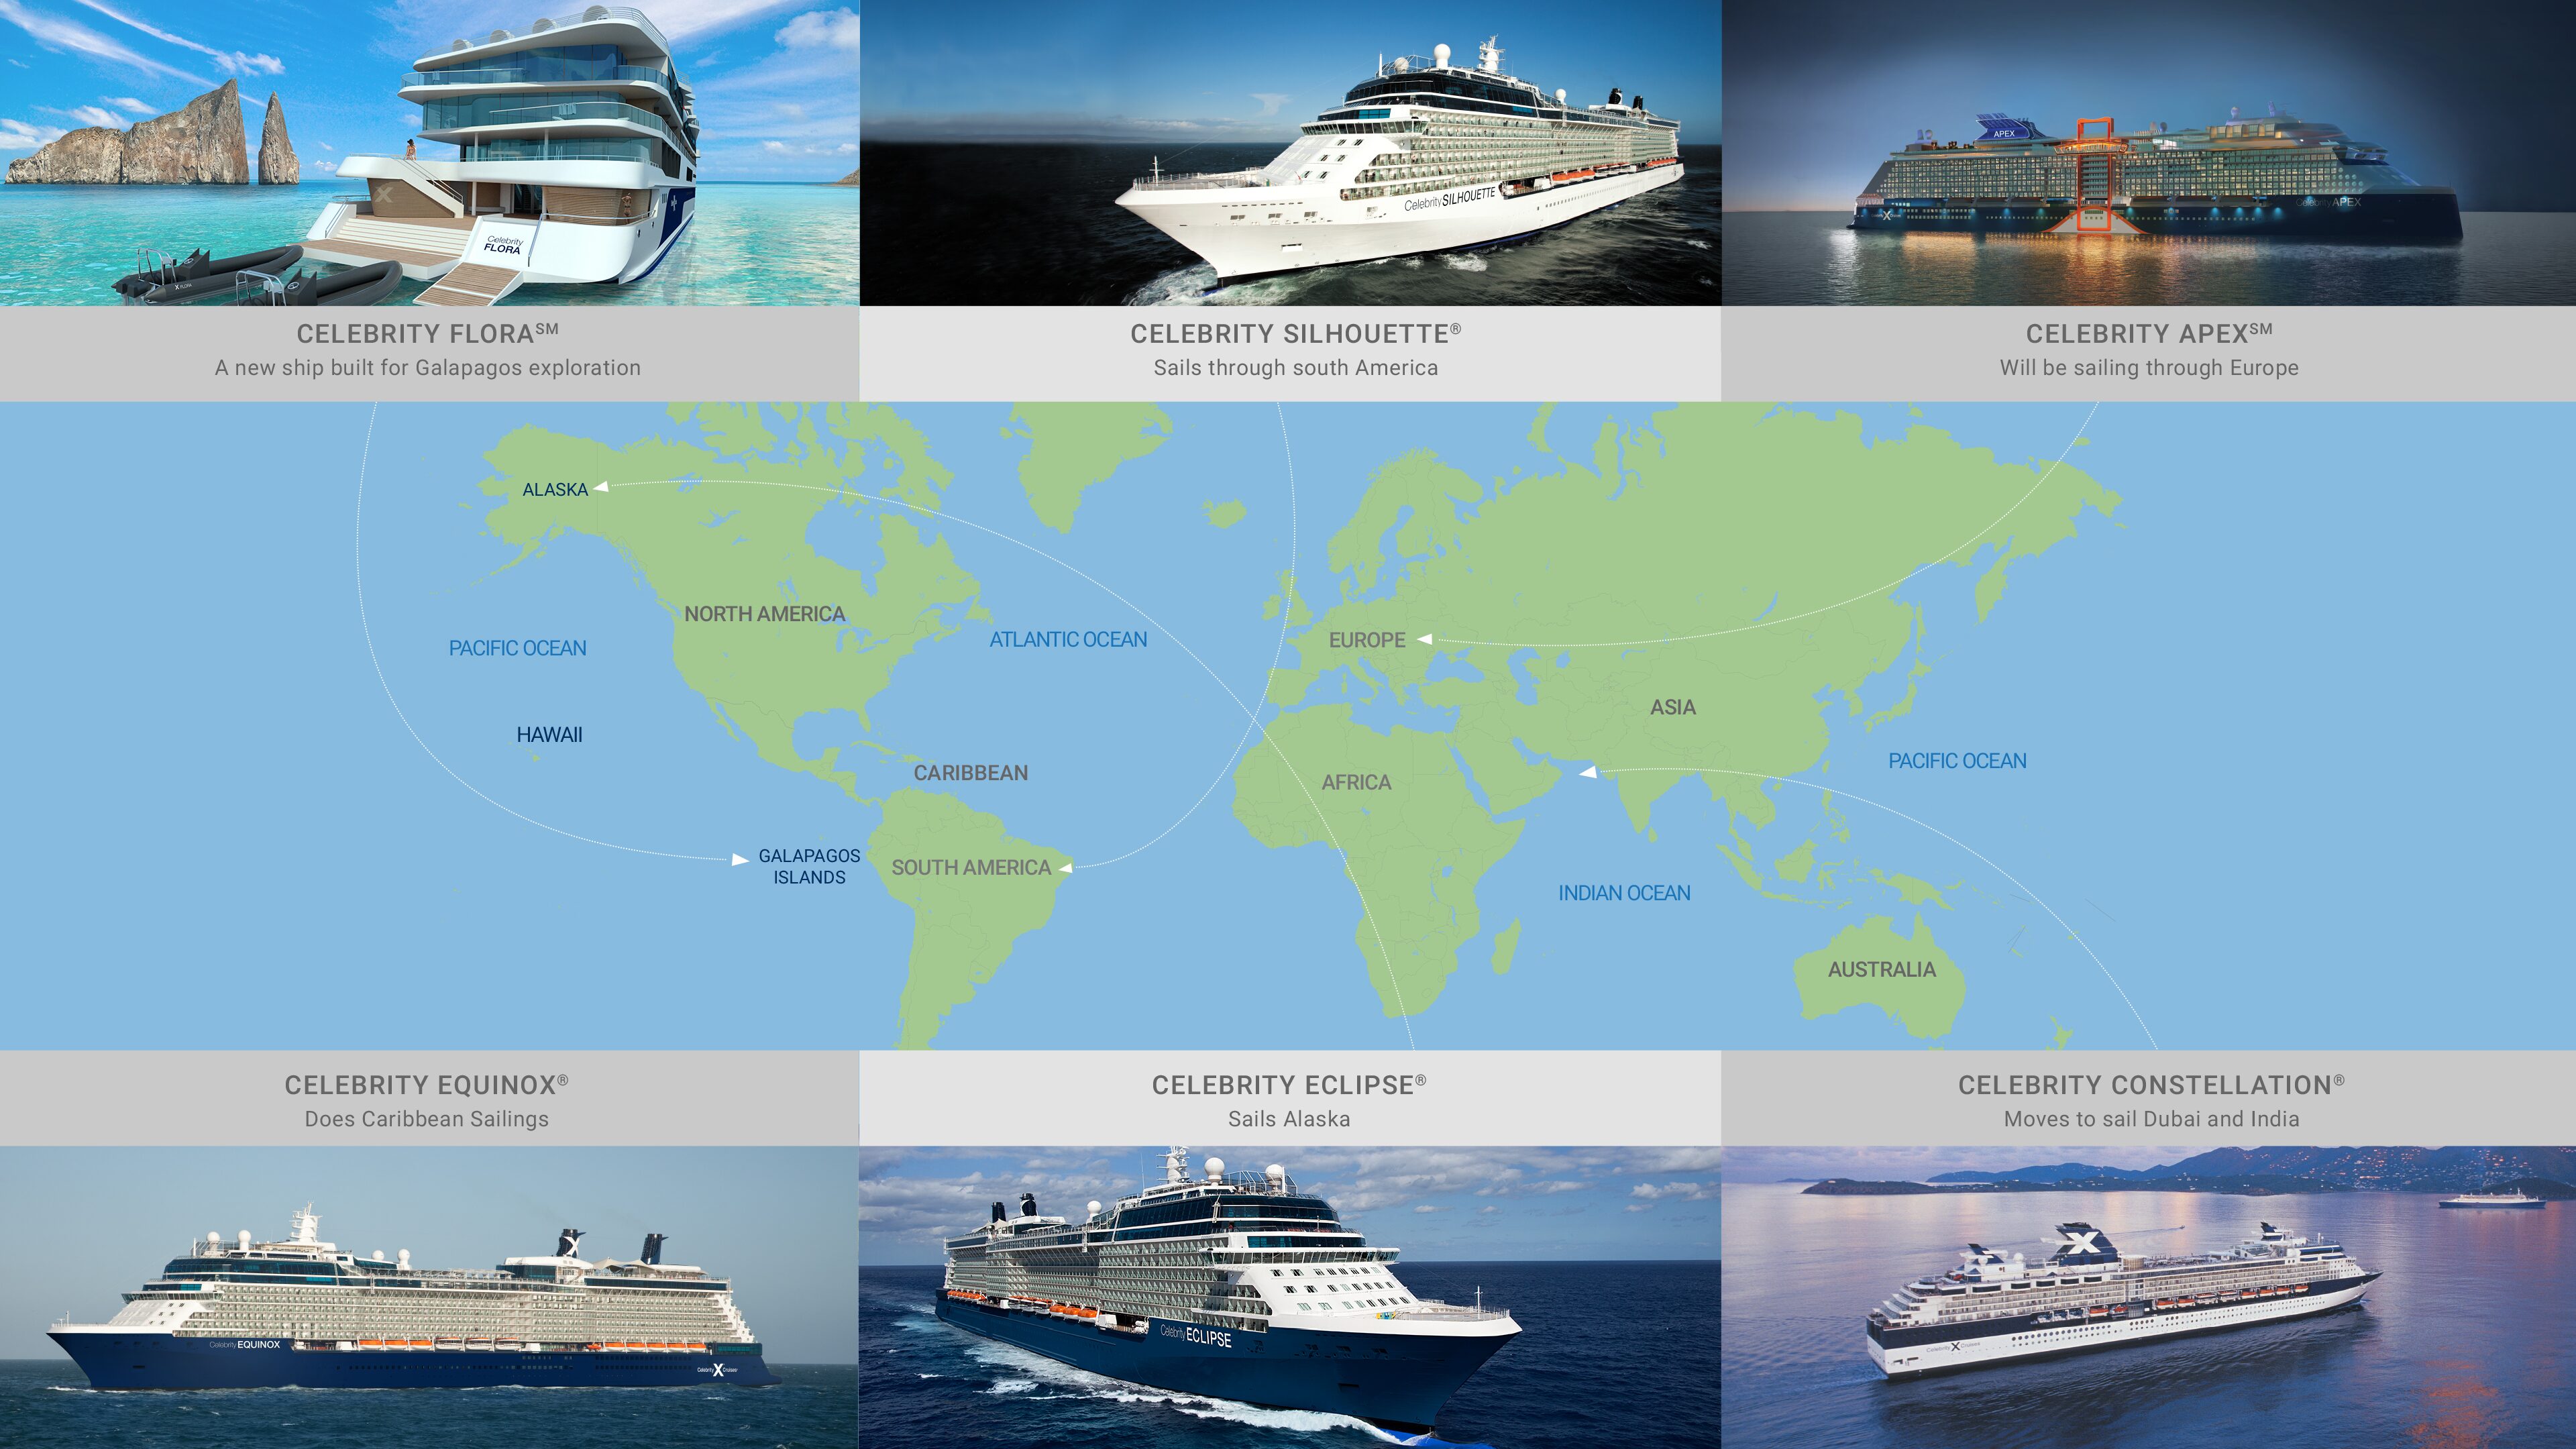 2019 will be a monumental year for Celebrity Cruises